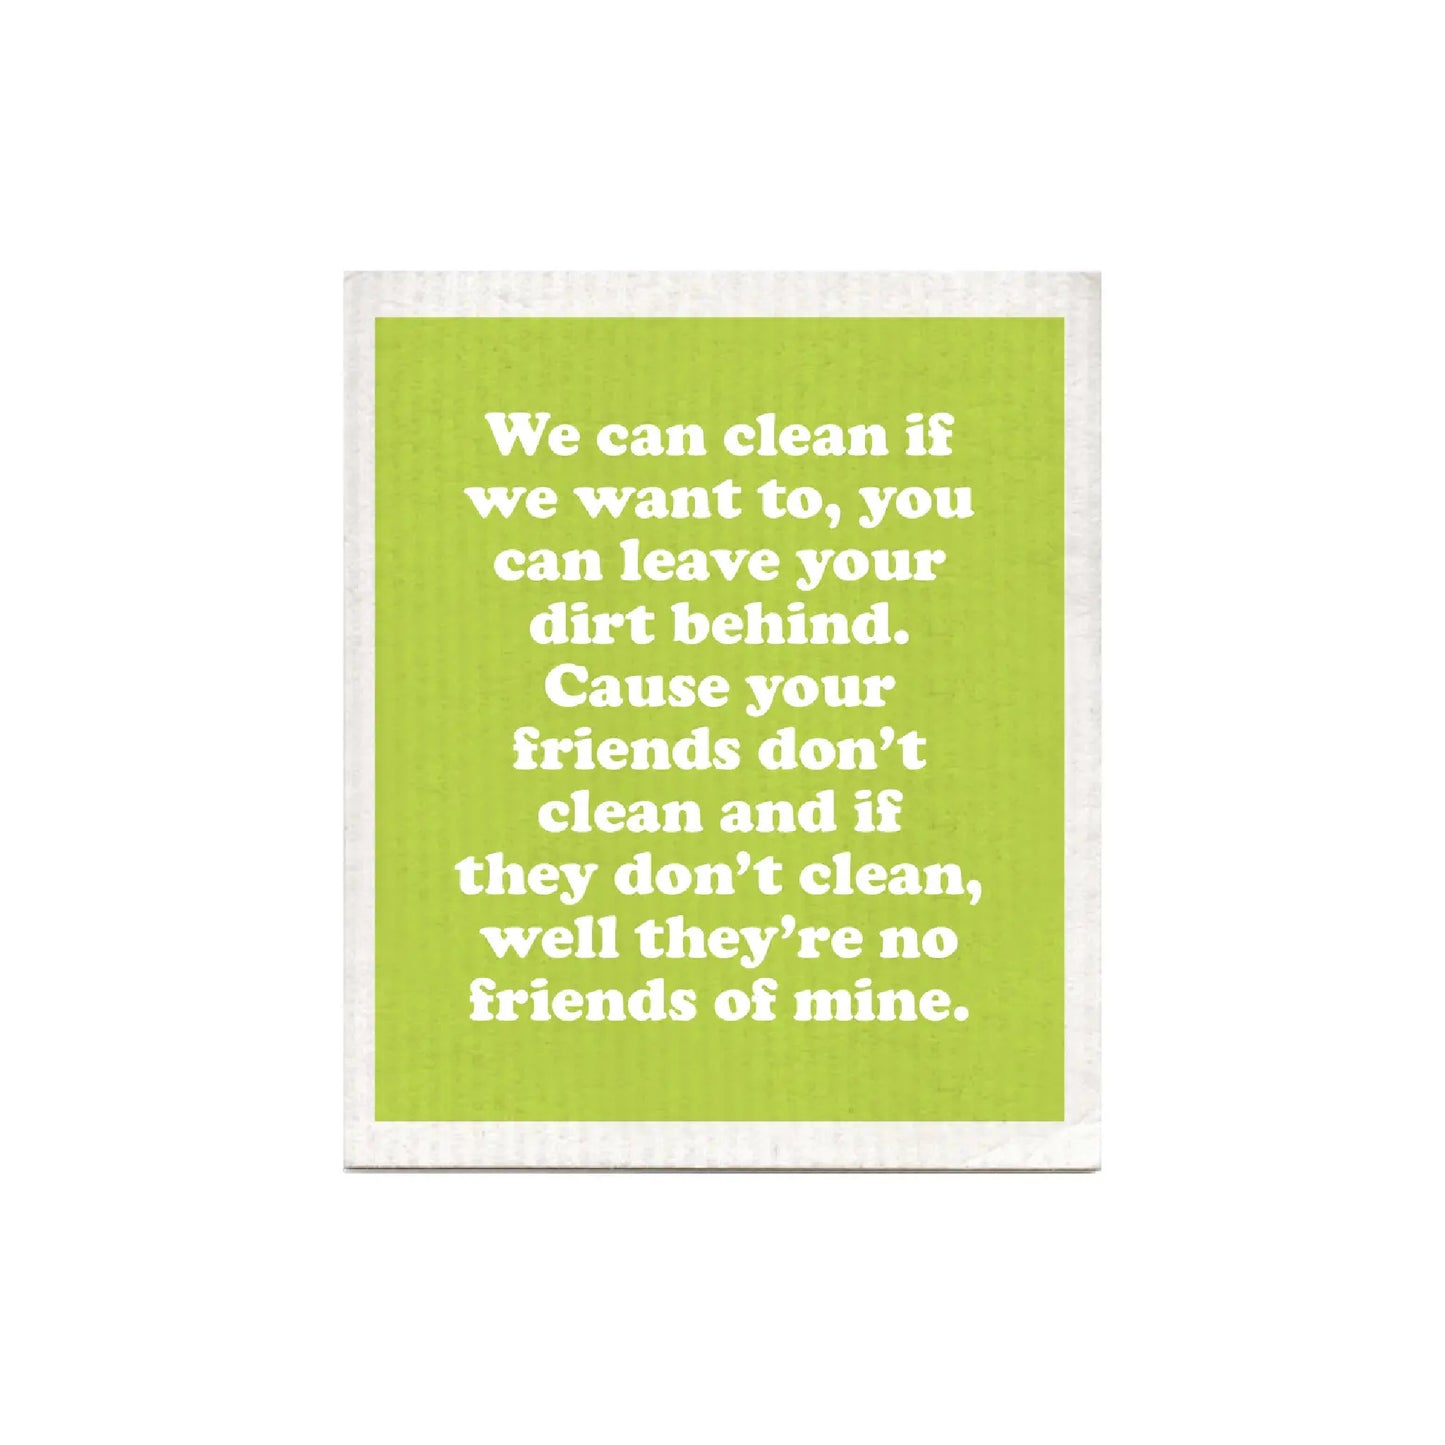 We can clean if you want to . . . Swedish Dishcloth